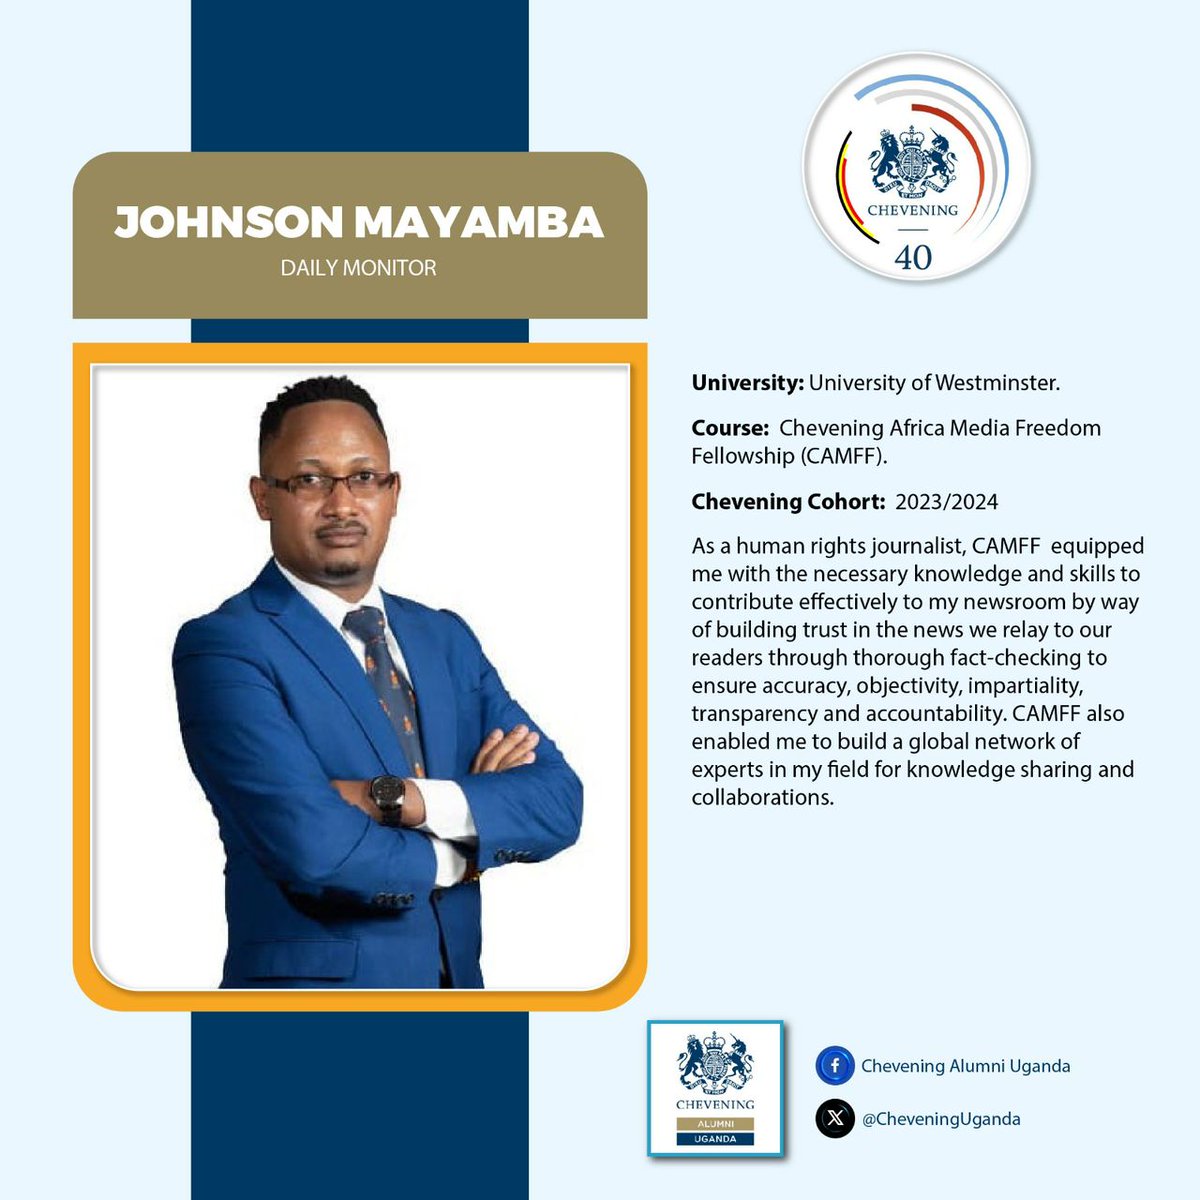 Today we celebrate Johnson Mayamba, who is scaling heights as a human rights journalist. Seeing that @CheveningFCDO helped you build a global network of experts is proof of the benefits of the Chevening scholarship. #CheveningAt40 #ChooseChevening